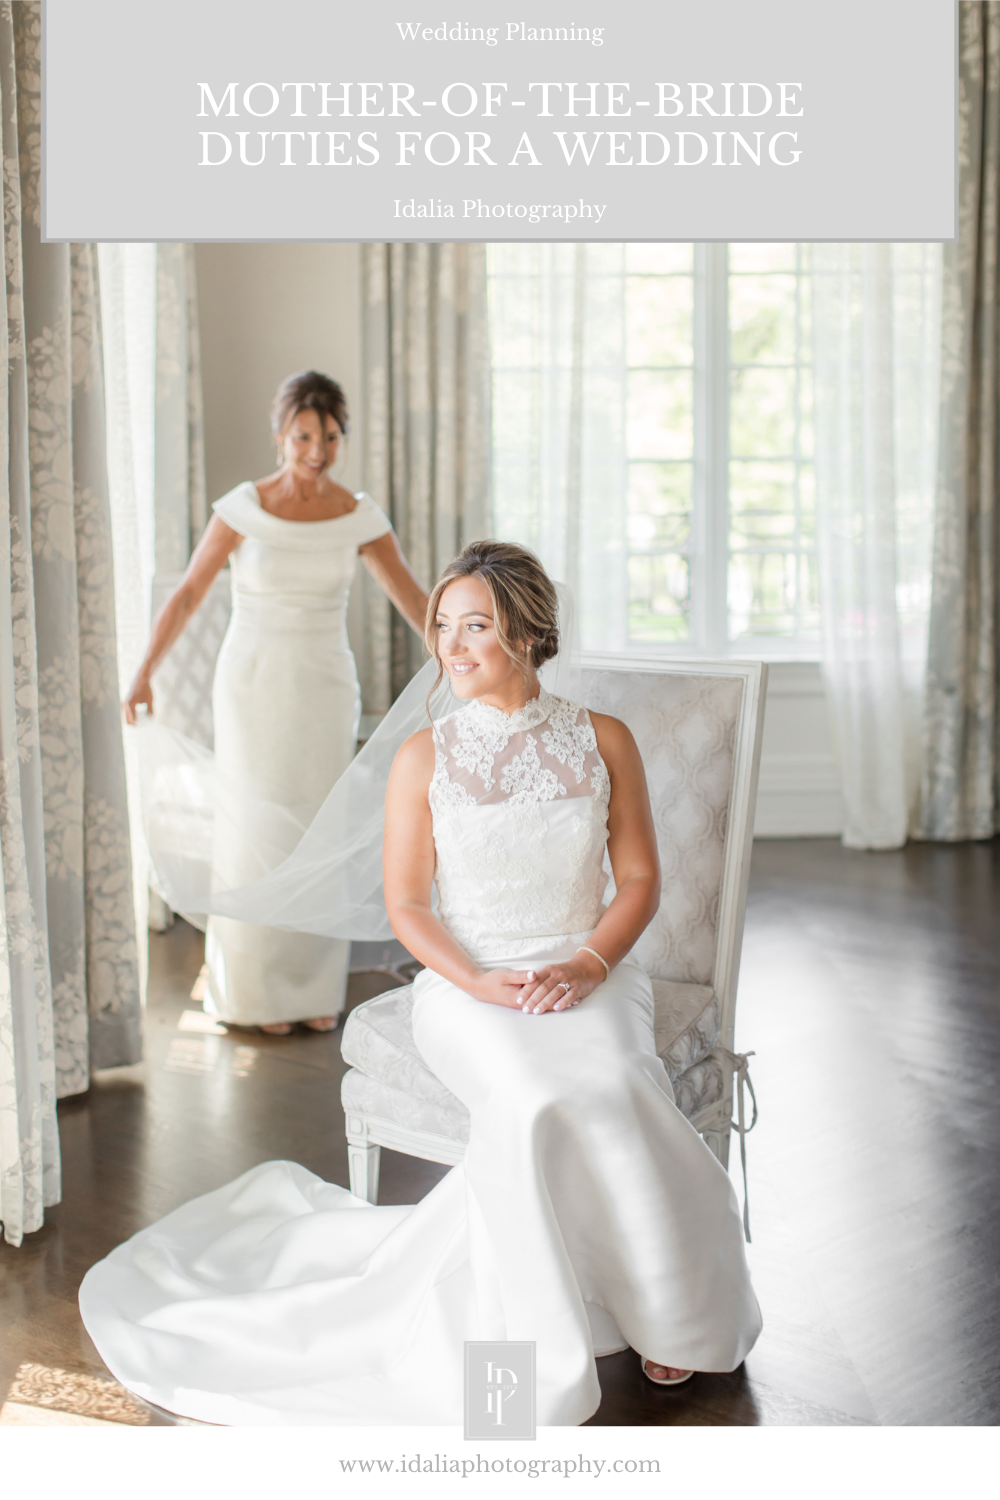 A Guide to Mother-of-The-Bride Duties by guest writer Mikayla St. Clair: tips for planning your wedding from Idalia Photography